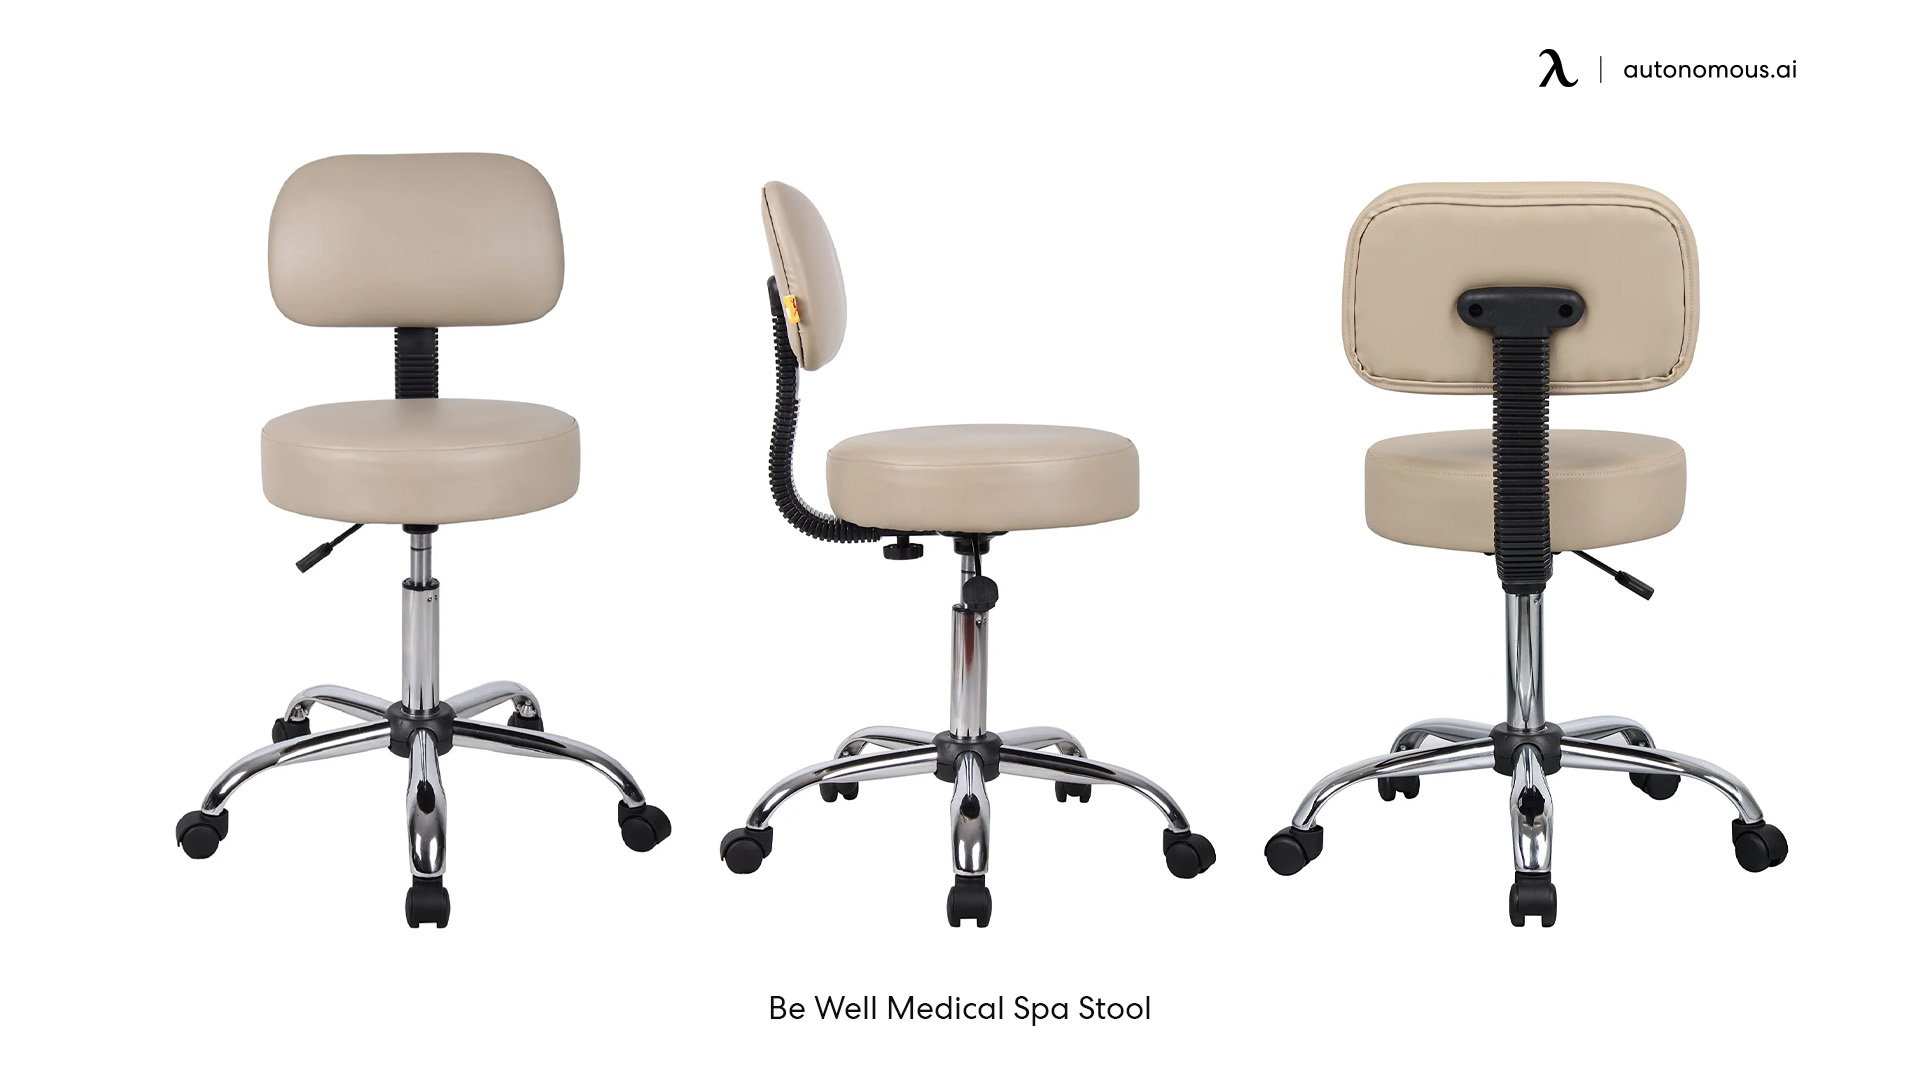 Be Well Medical Spa desk stool